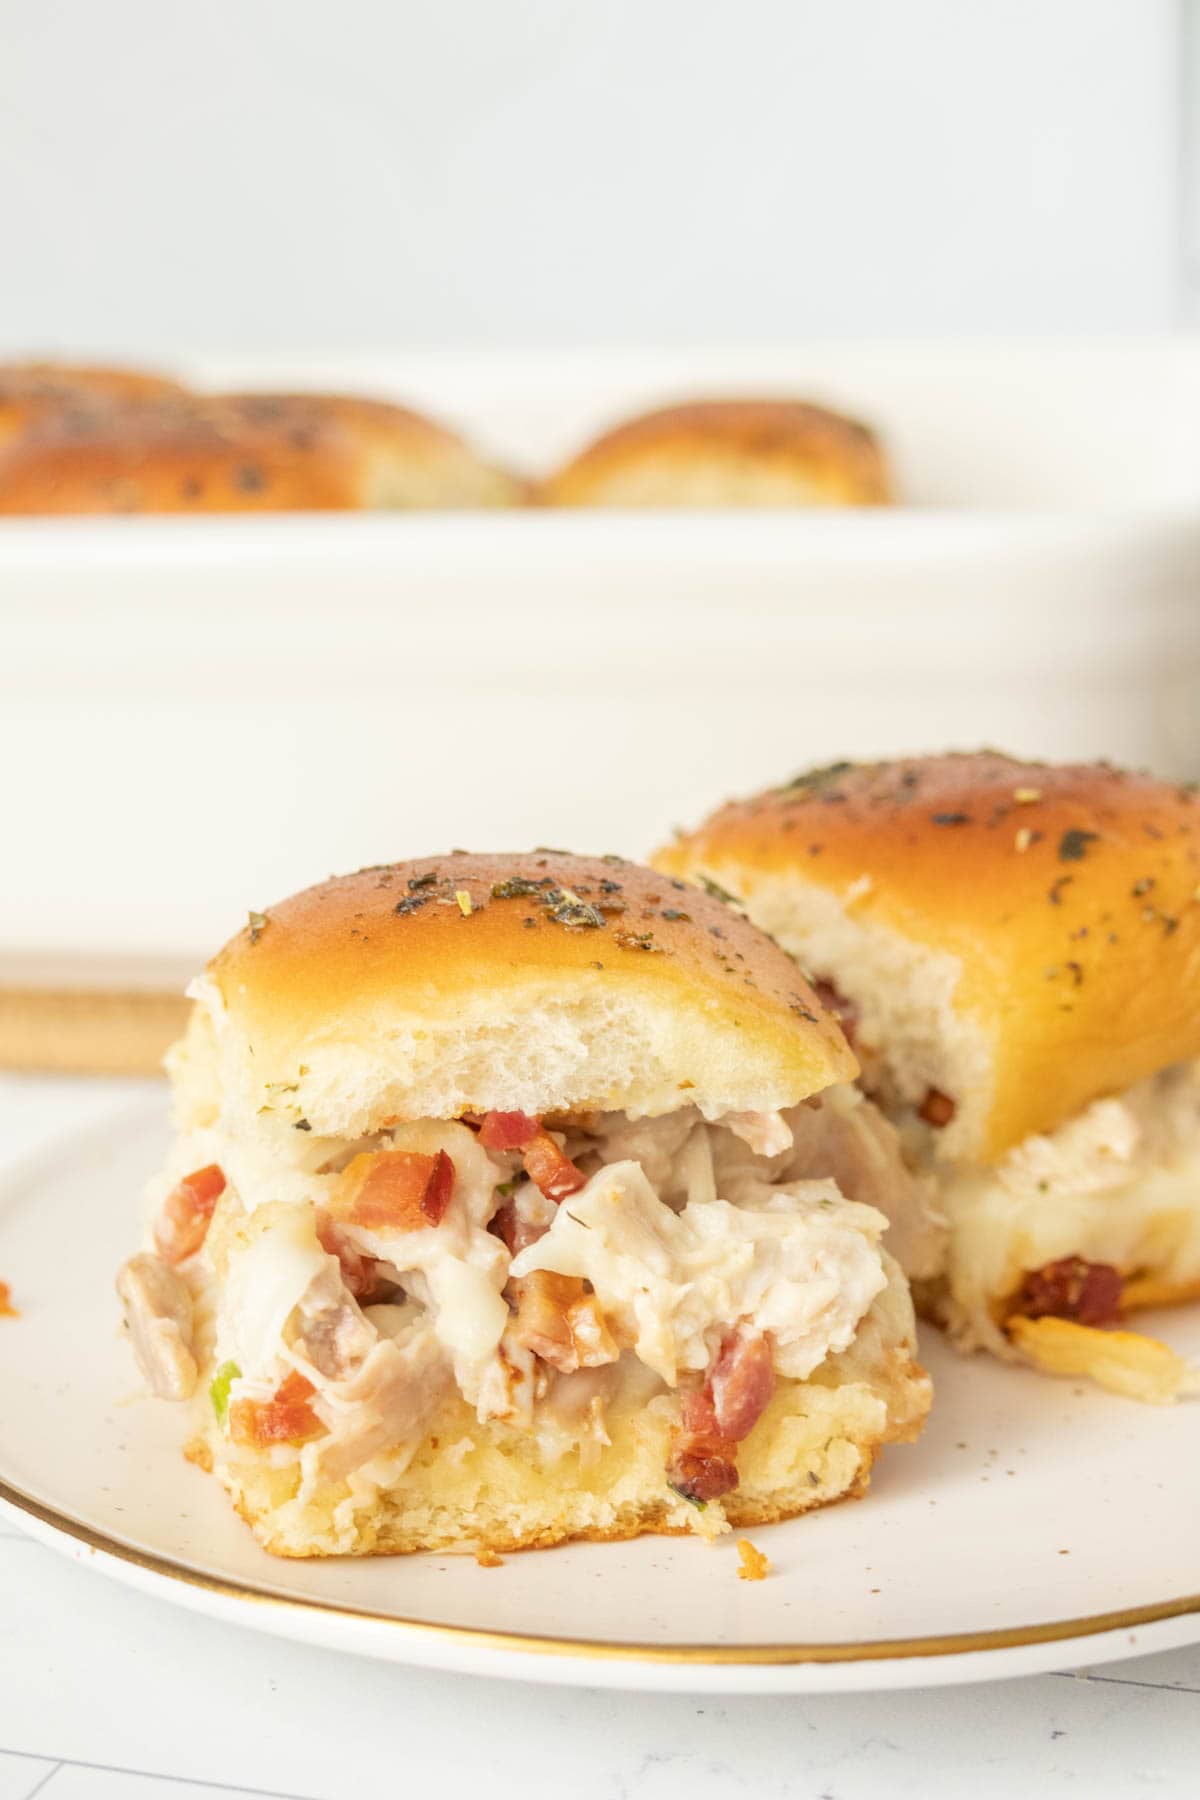 Chicken and bacon sliders on a plate.